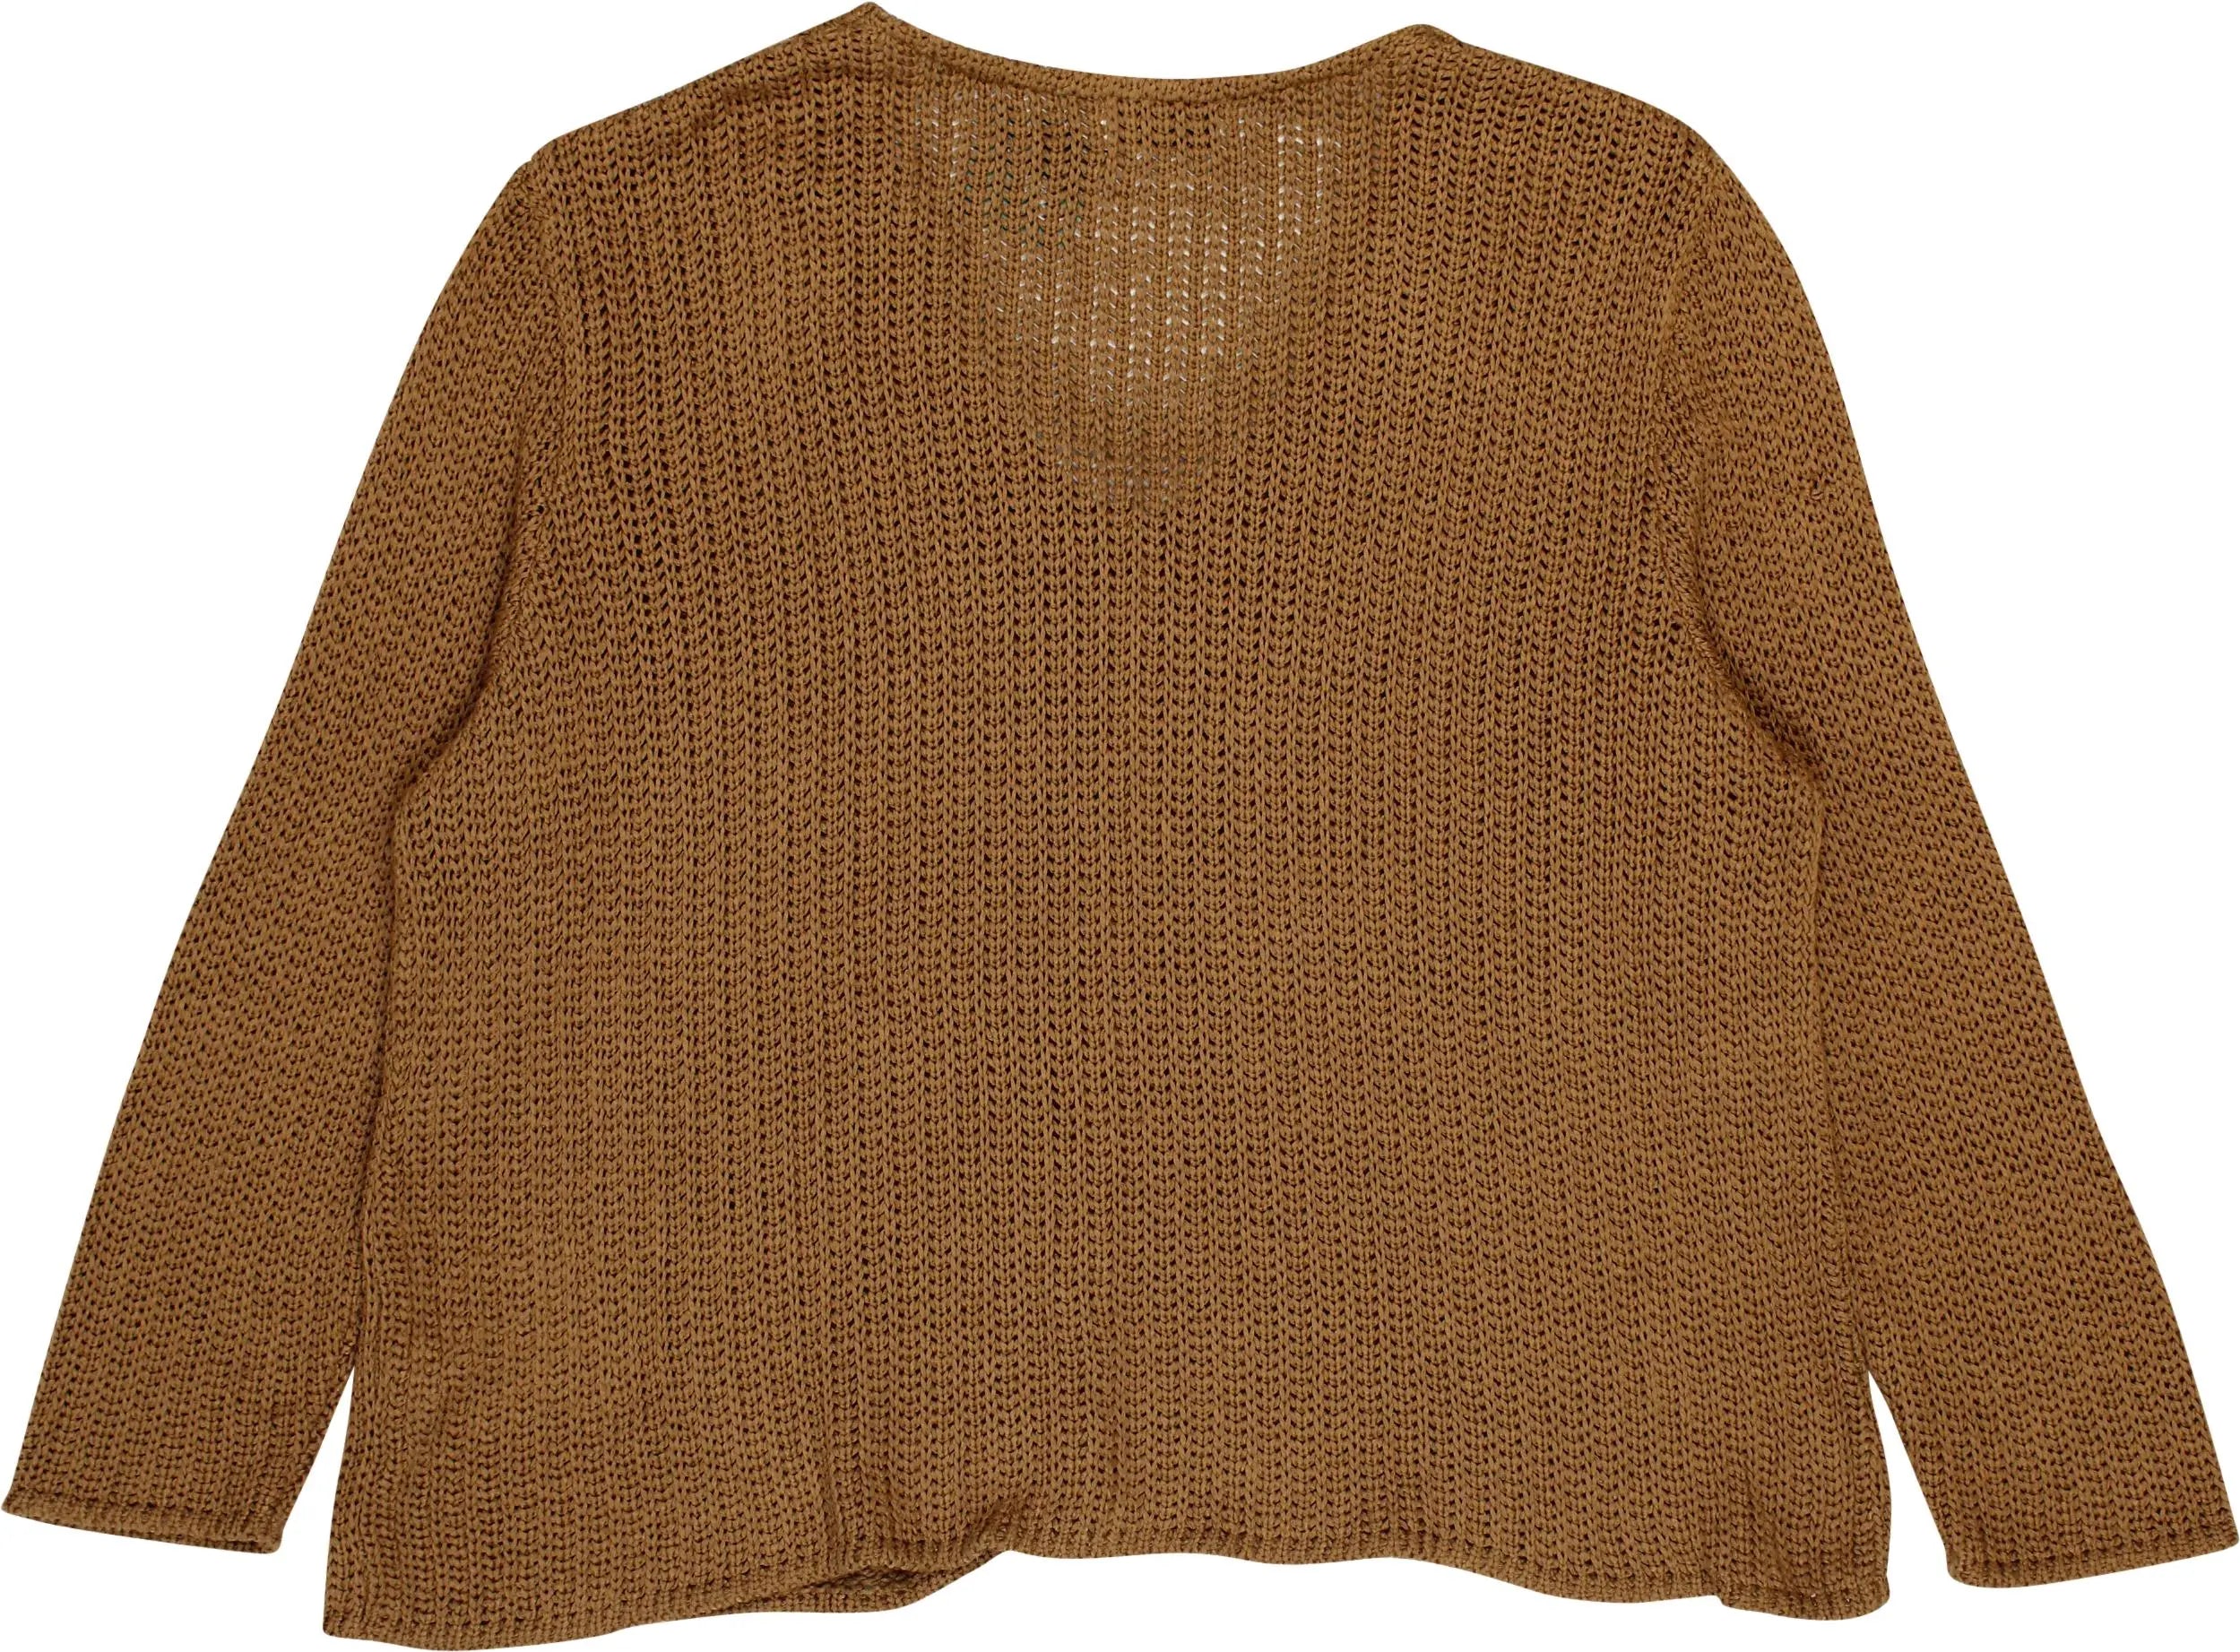 Miss Etam - Brown Knitted Cardigan- ThriftTale.com - Vintage and second handclothing